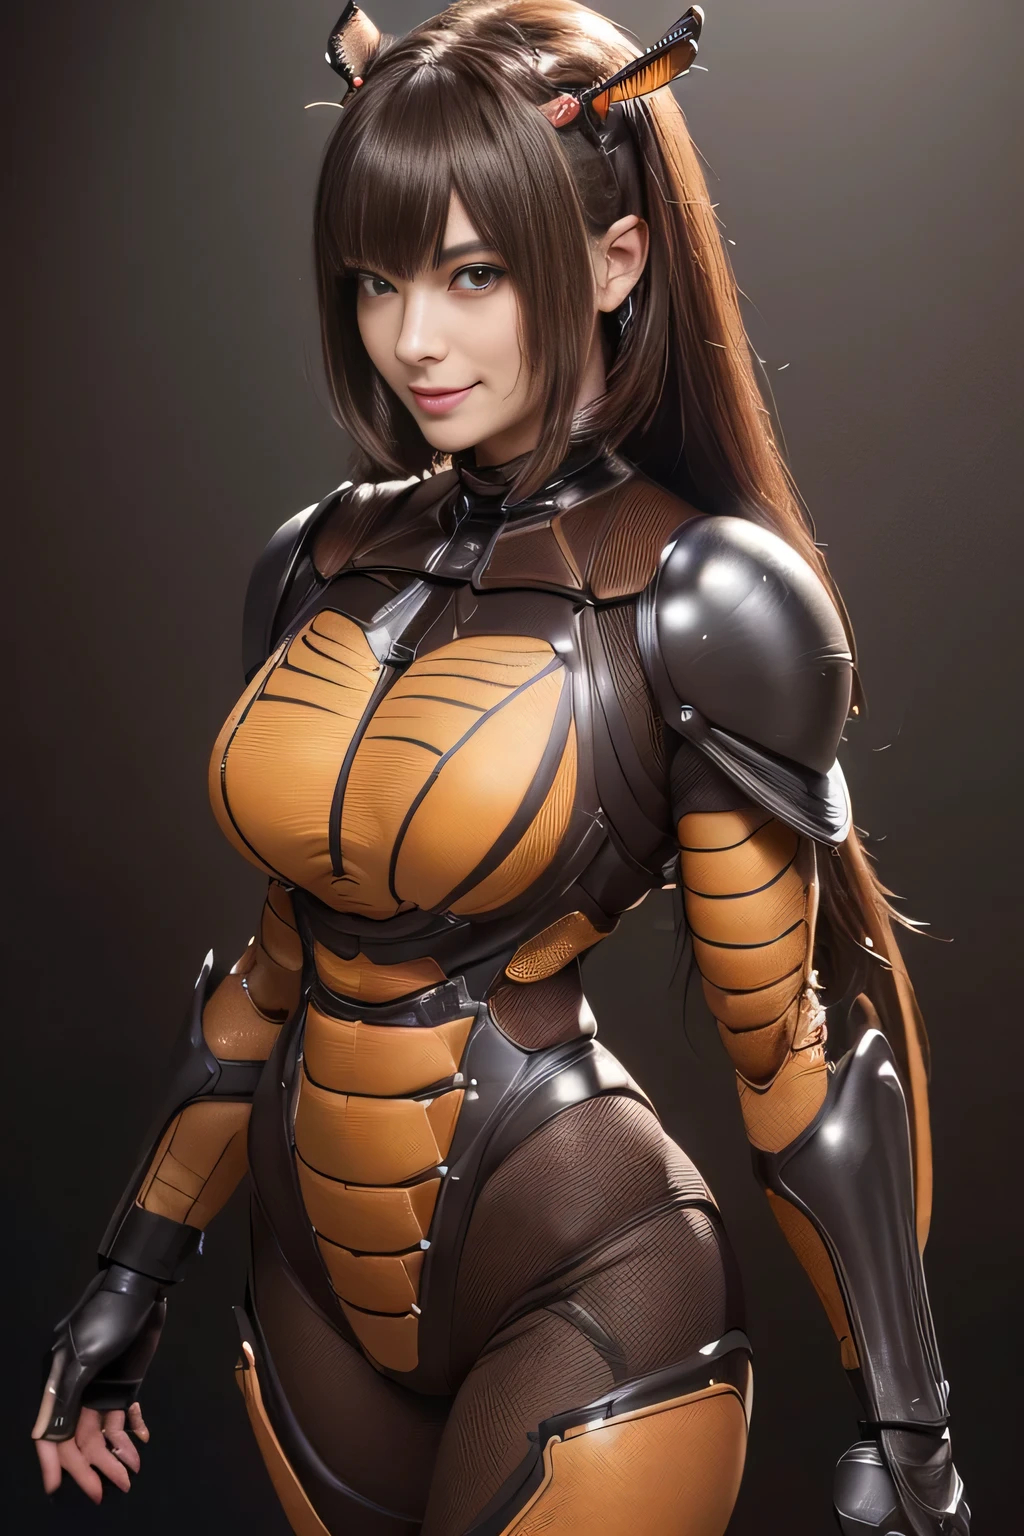 (High resolution,masterpiece,highest quality,Very detailed CG, anime, official art:1.4), realistic, photograph, amazing detail, all complicated, luster and luster,great many layers, 8k wallpaper, 3D, sketch, cute, figure,( alone:1.4), perfect female proportions,villain&#39;s daughter, (Fusion of dark brown cockroach and lady:1.4), (brown cockroach form lady:1.2), (brown cockroach woman:1.2), (Fusion:1.2), (alone:1.4), (evil smile:1.2), muscular, abs, (Cockroach brown exoskeleton bio insect suit:1.4), (Cockroach brown exoskeleton bio insect armor:1.2), (brown transparent cockroach feathers:1.4), (brown cockroach antenna:1.3),